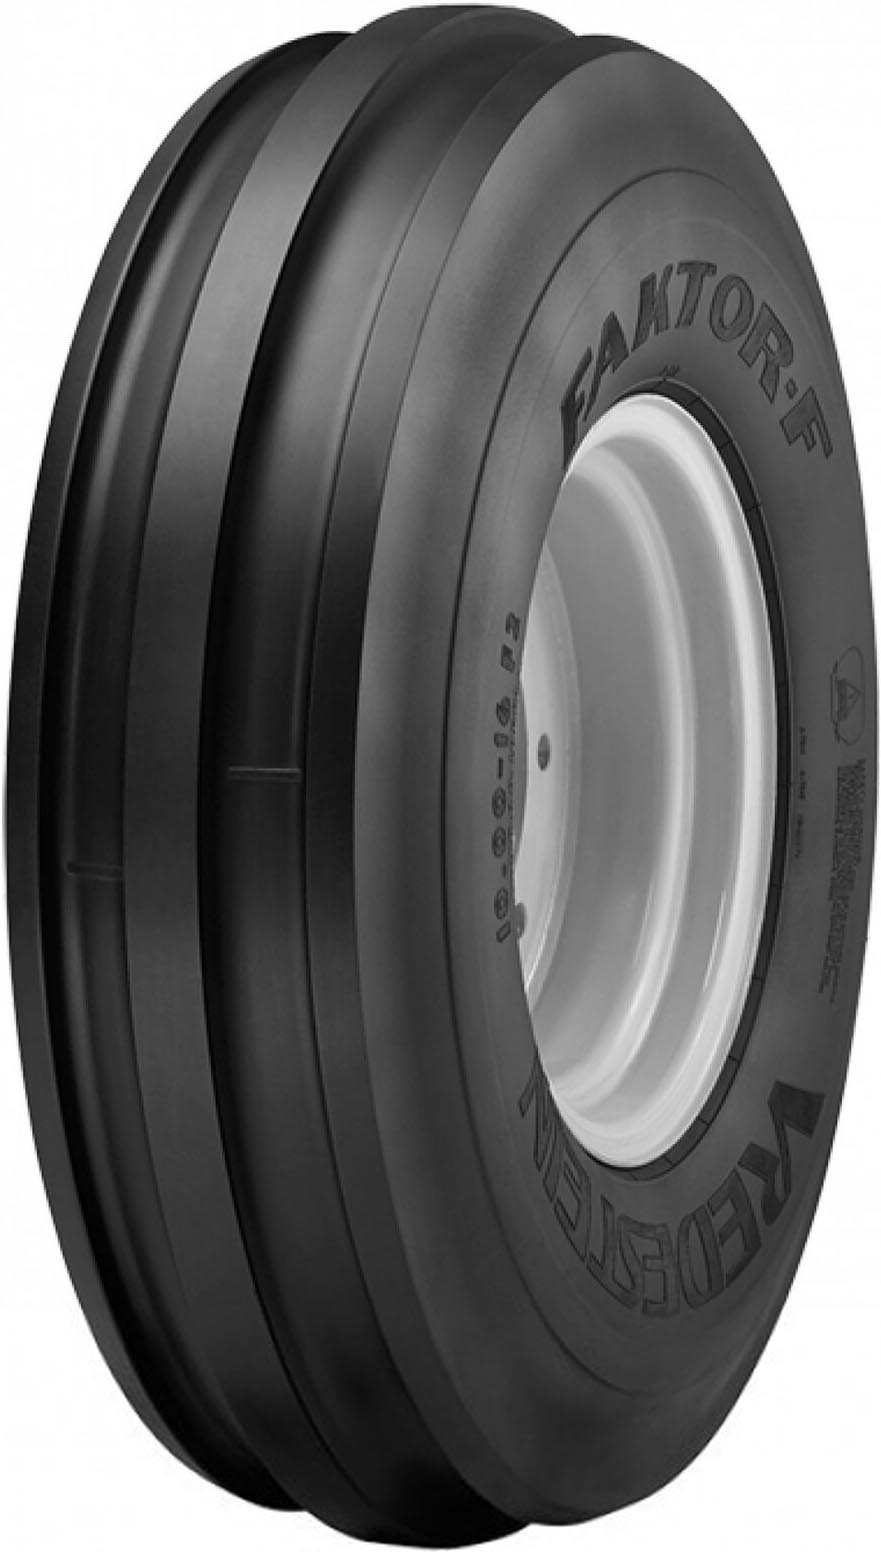 product_type-industrial_tires VREDESTEIN Faktor- 5.00 R15 82A8